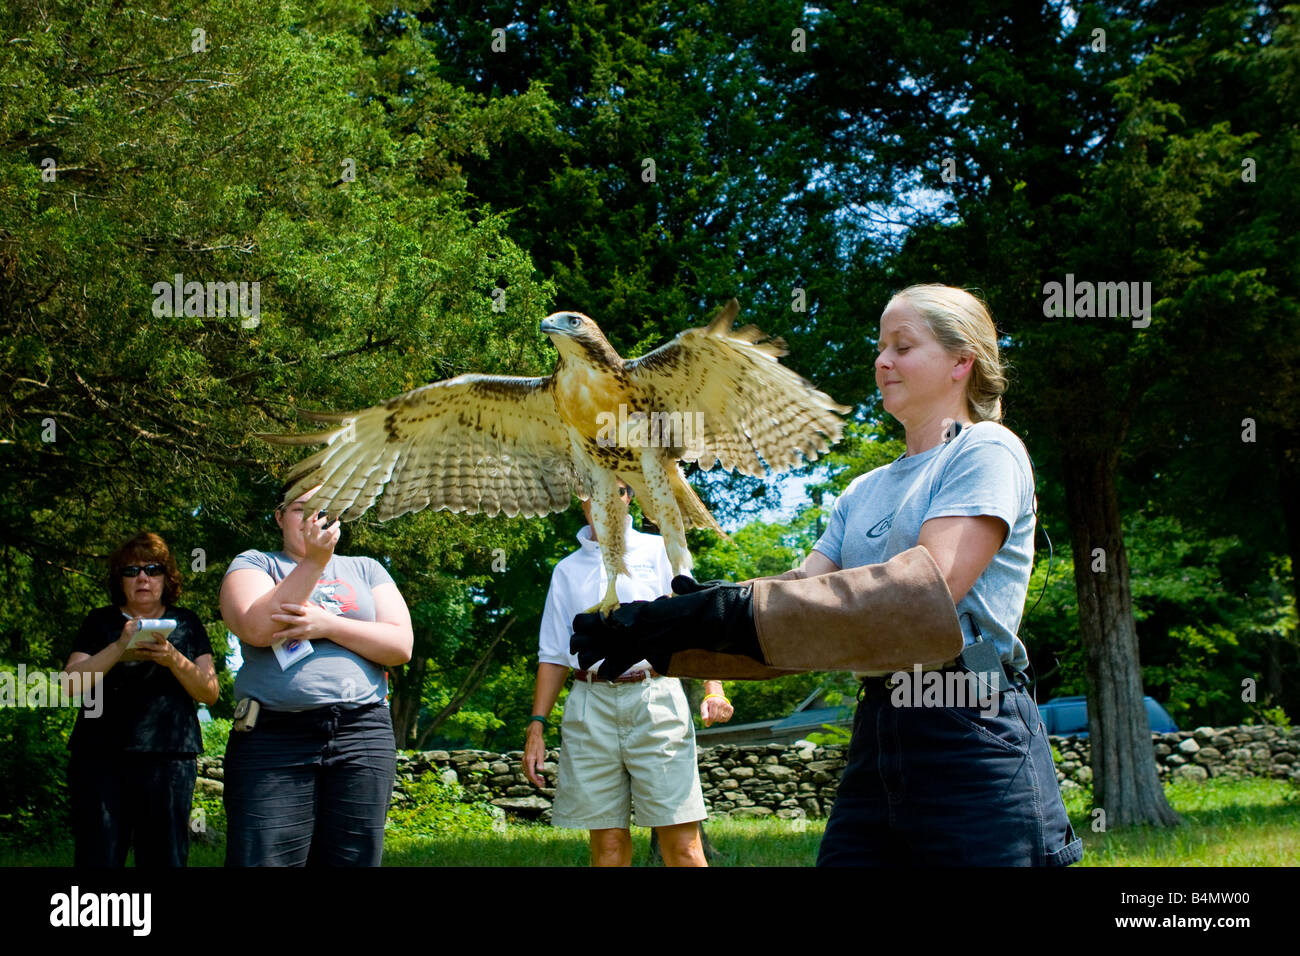 Environmentalists release a red Tailed hawk back into the wild after rehabilitating the injured bird Stock Photo